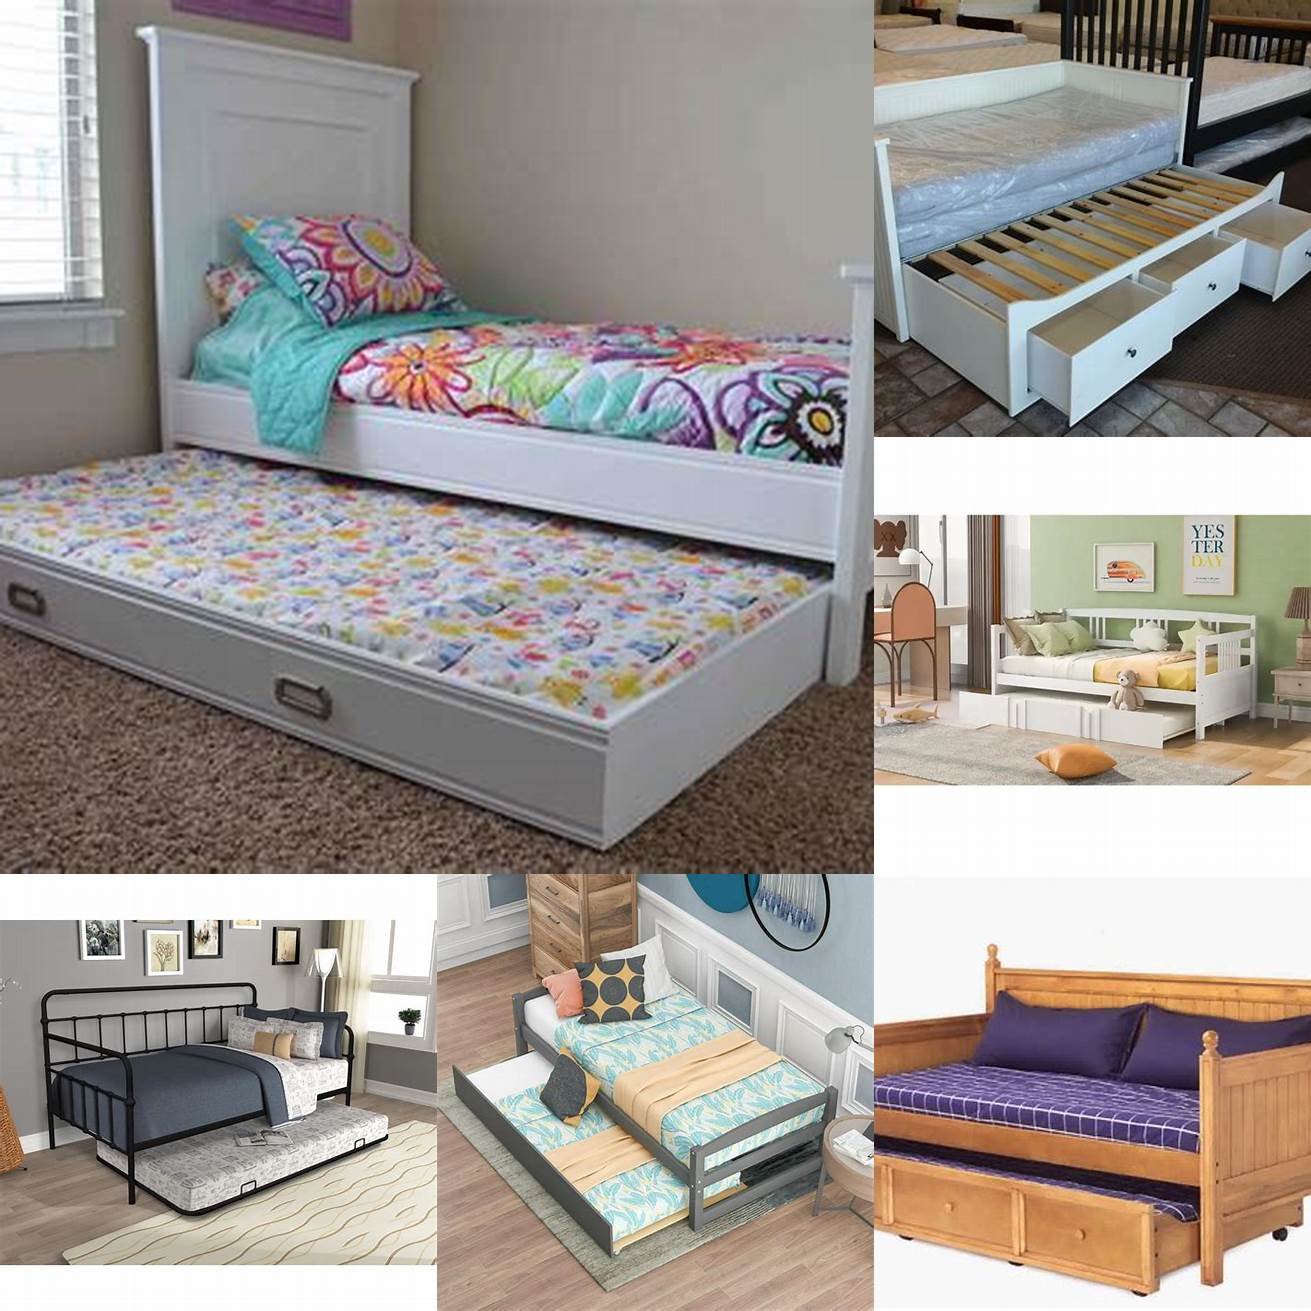 Easy to assemble Most twin beds with trundle come with easy-to-follow instructions and can be assembled in a few hours You dont need any special tools or skills to put them together